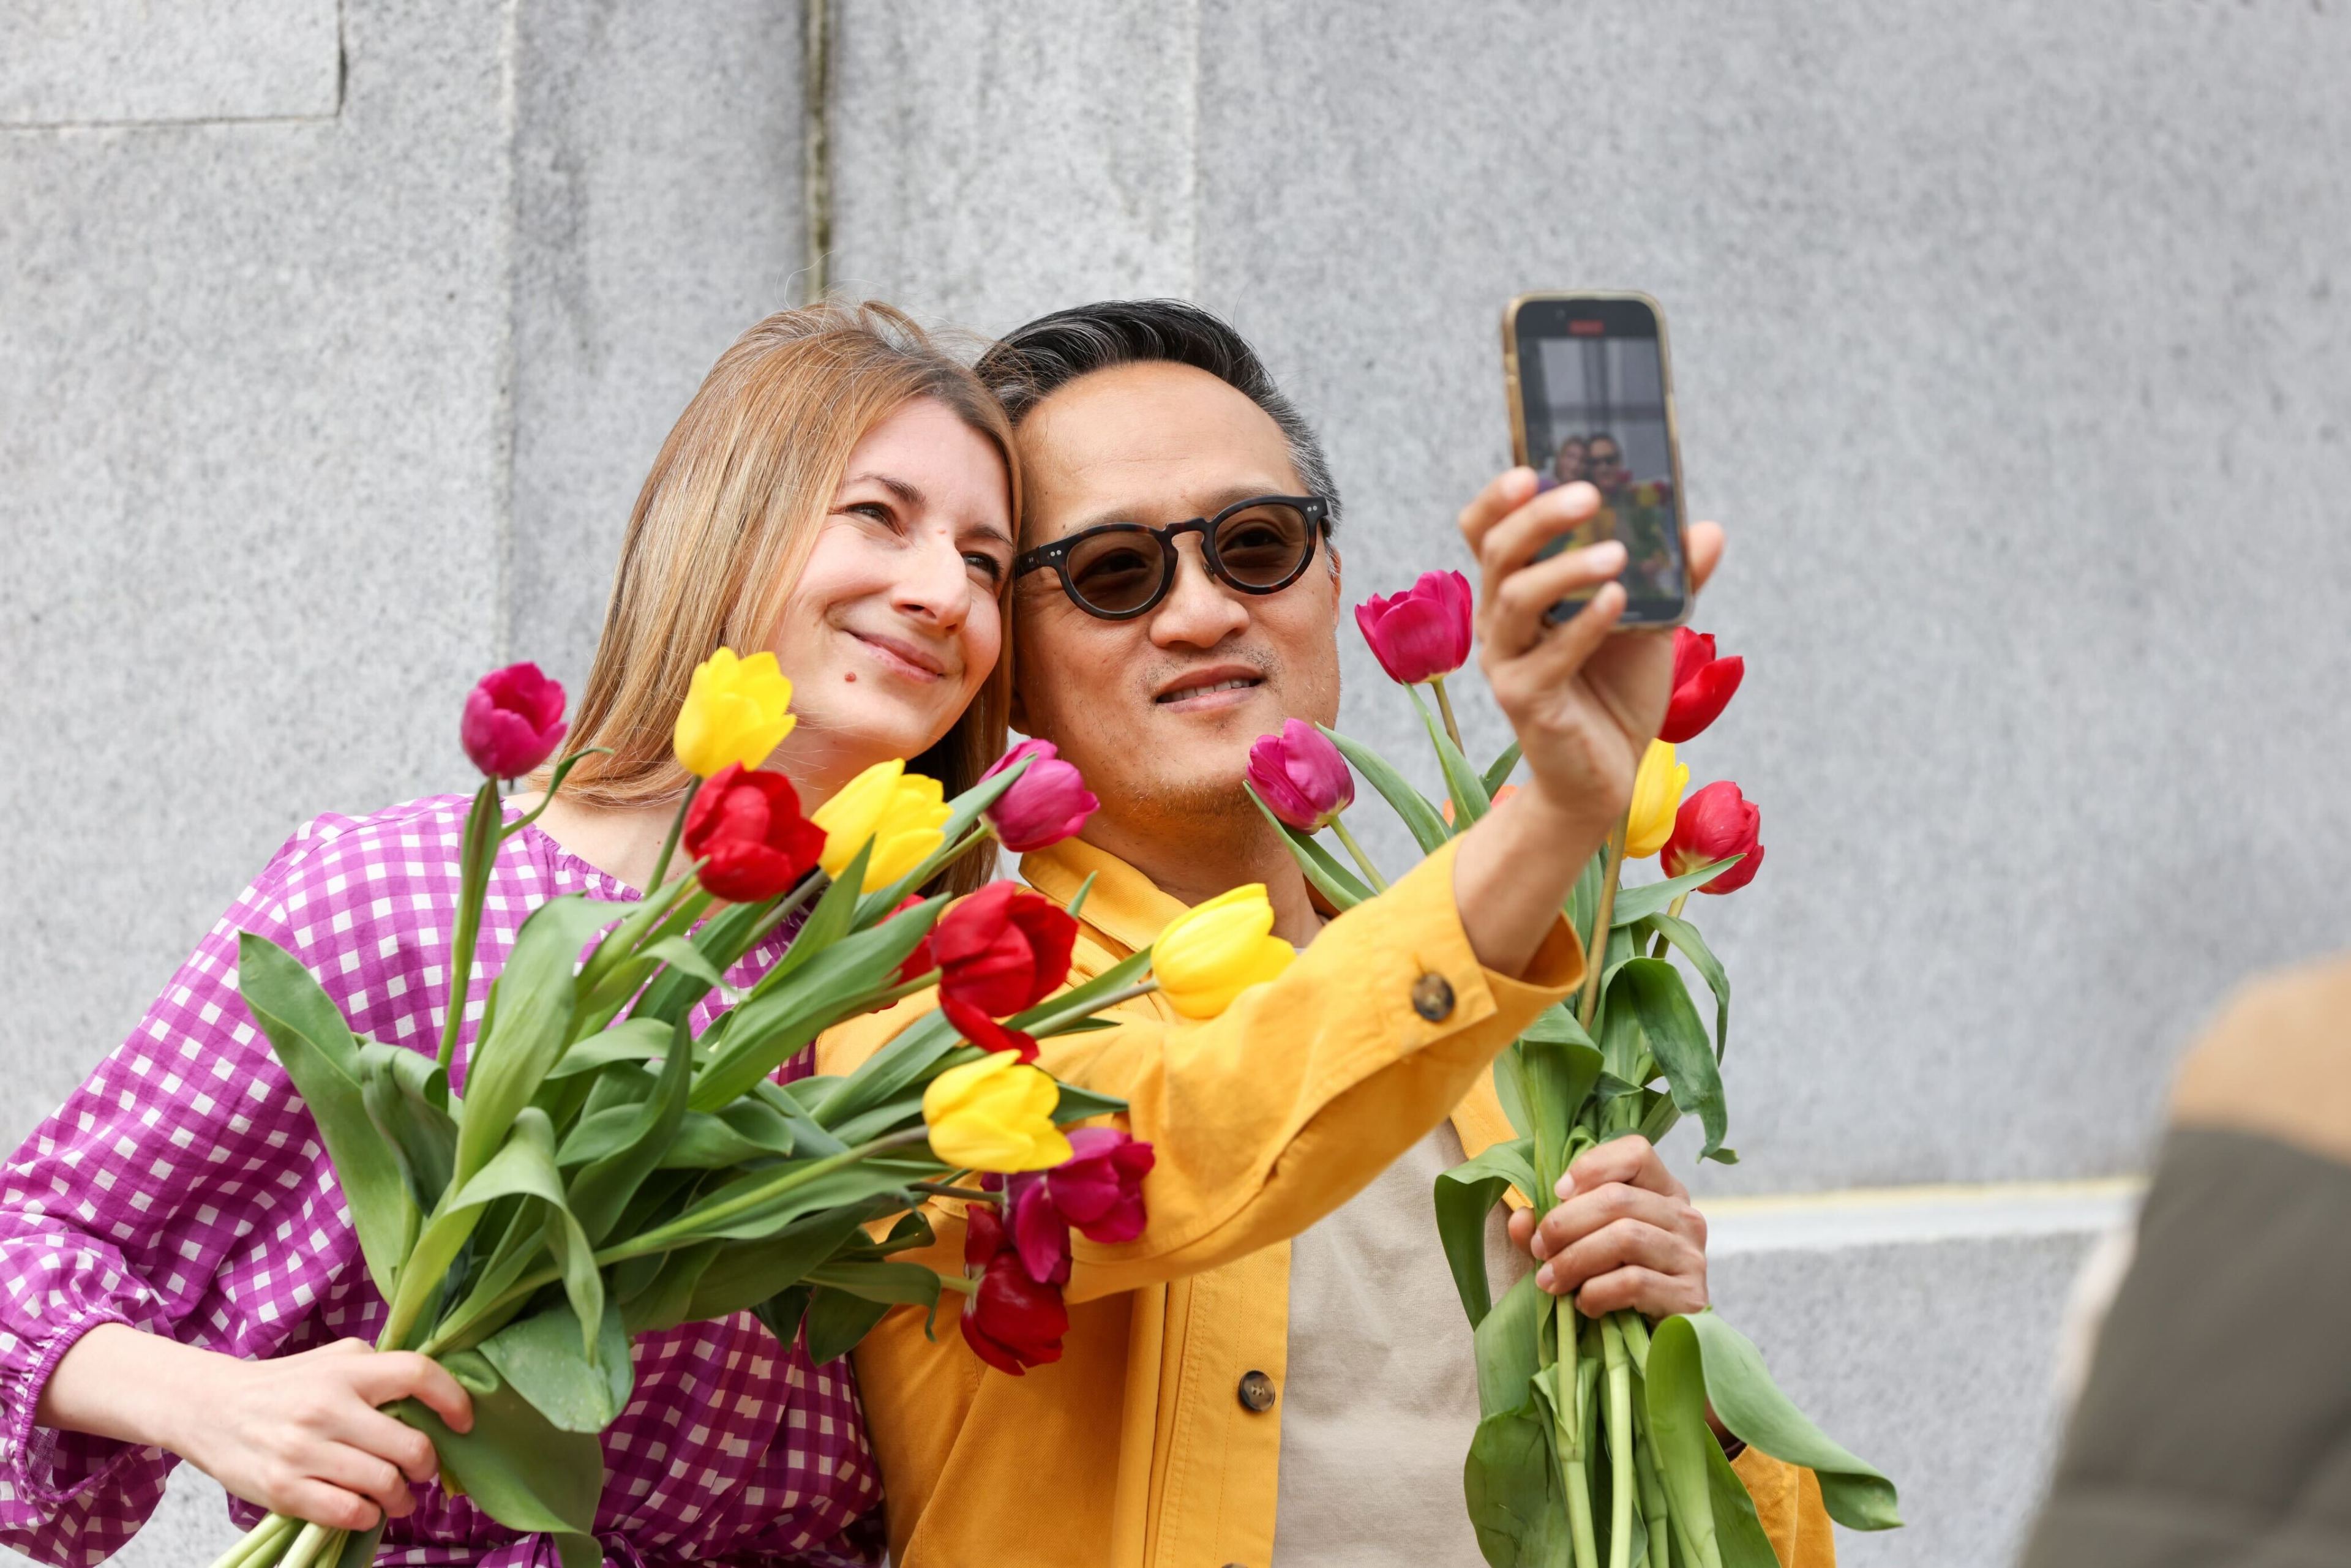 A man and woman taking a selfie with a bouquet of colorful tulips.